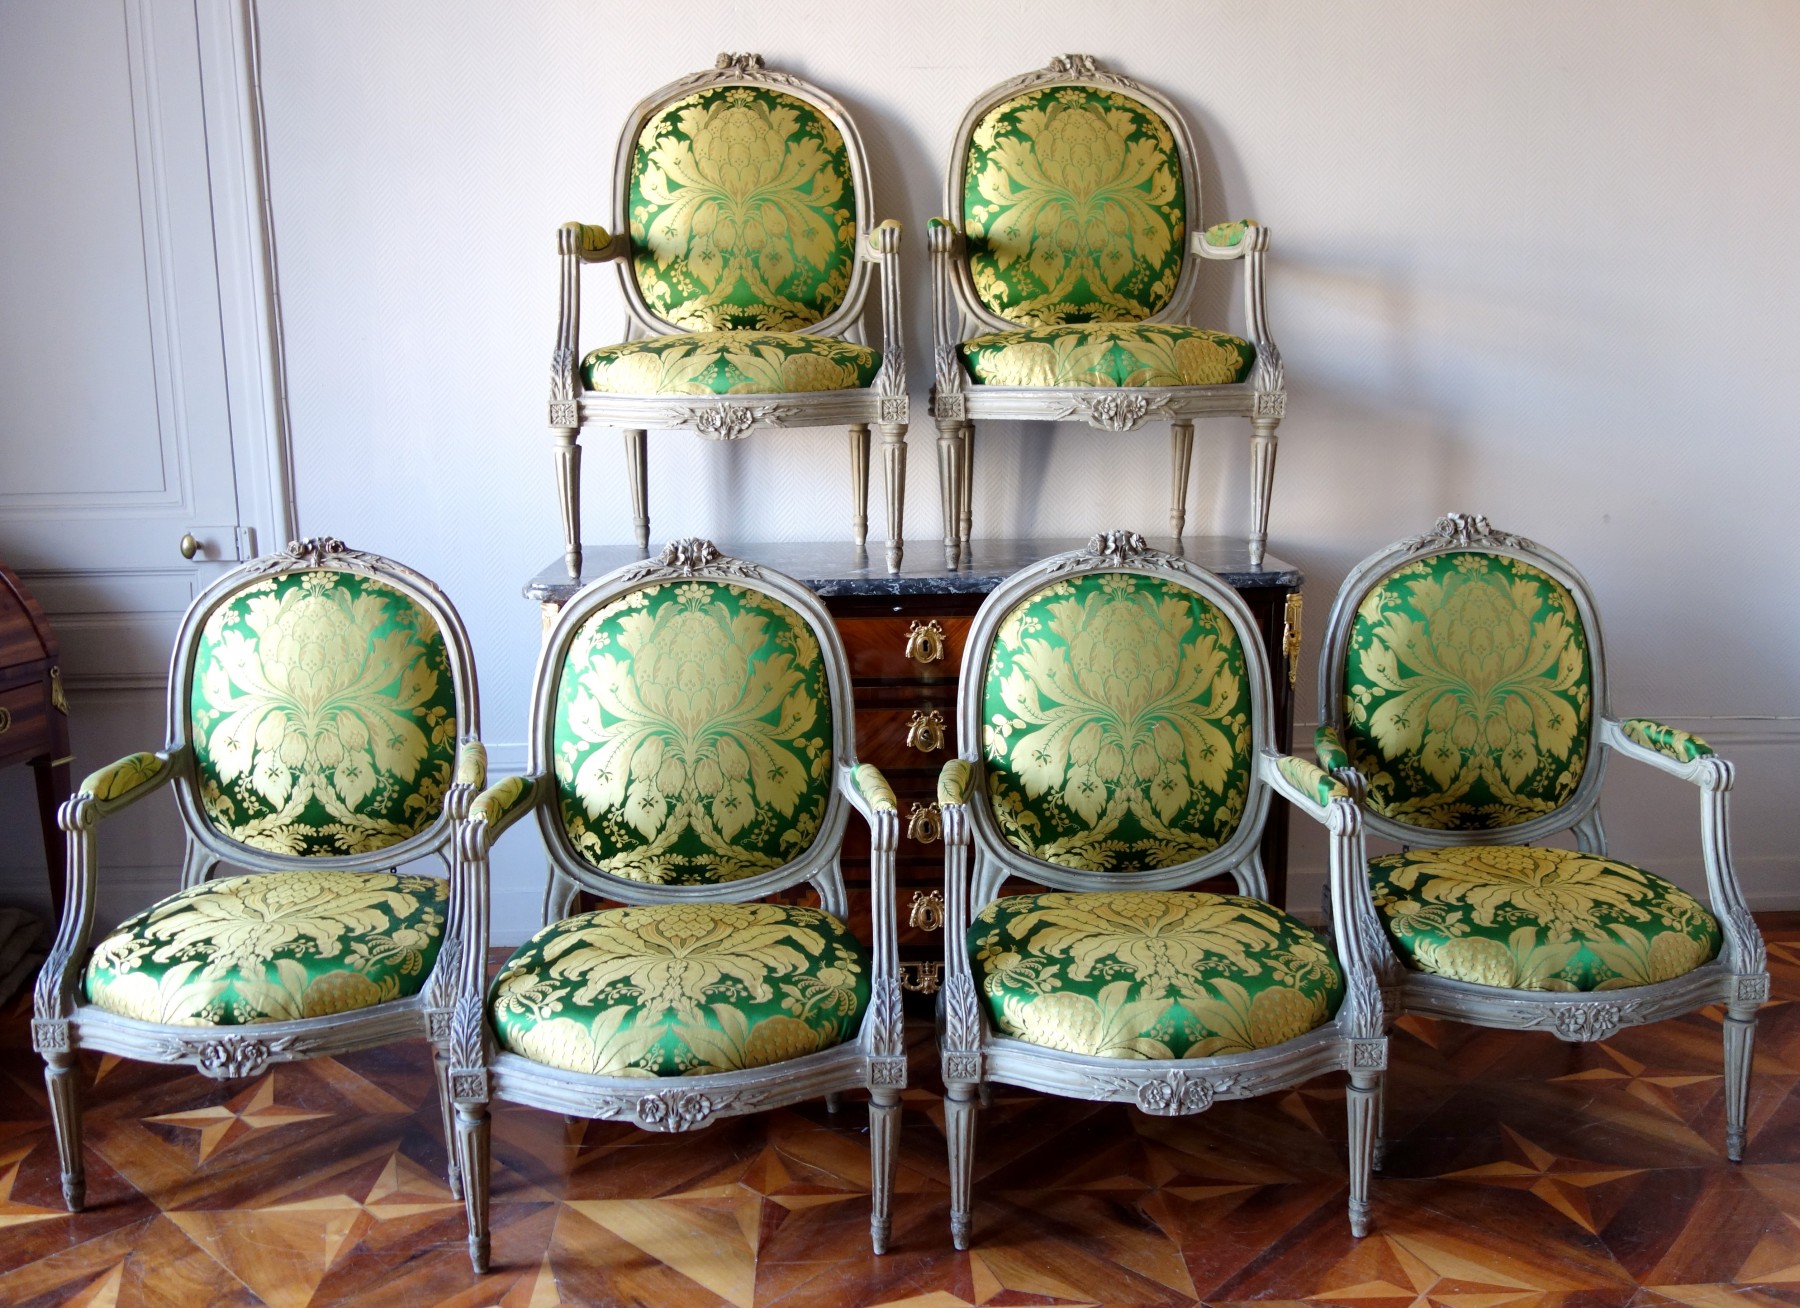 Louis XIV Style Chair, Silk Damask Upholstery